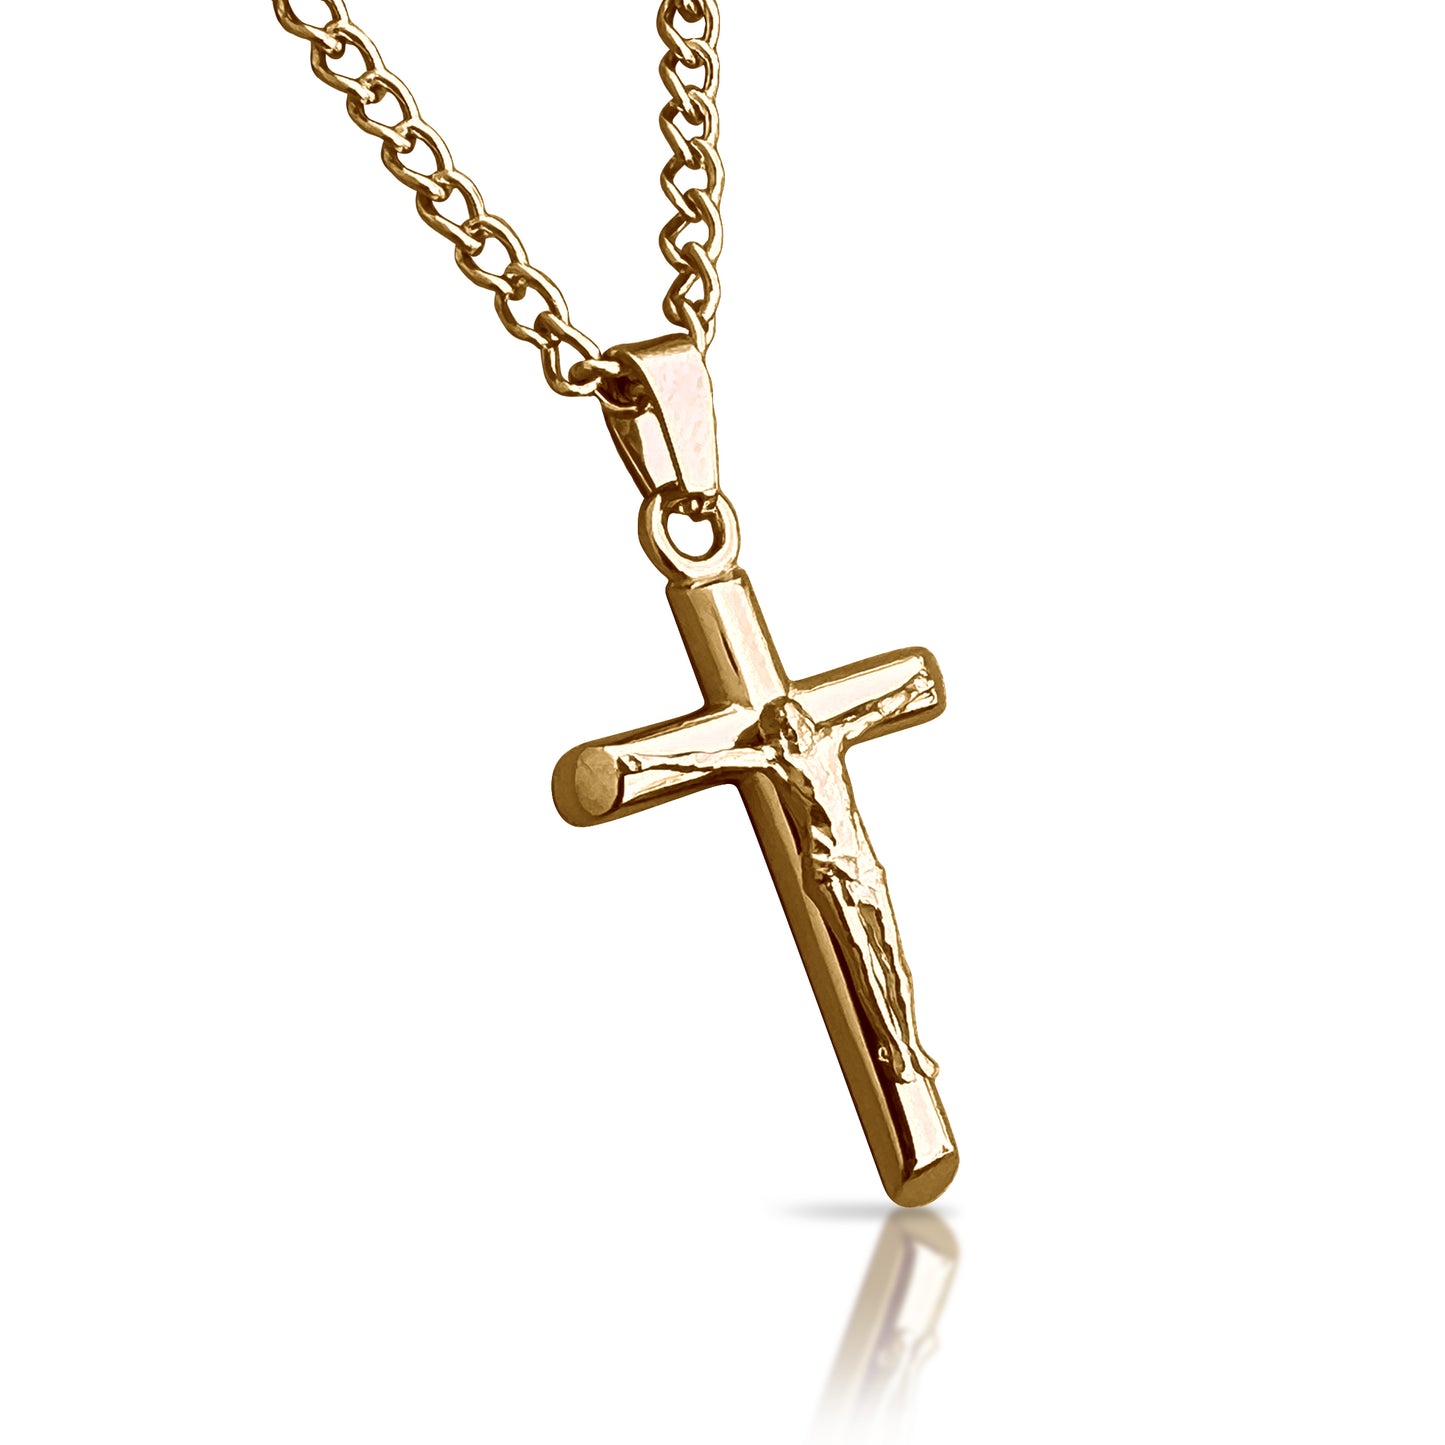 Crucifix Pendant With Chain Necklace - 14K Gold Plated Stainless Steel